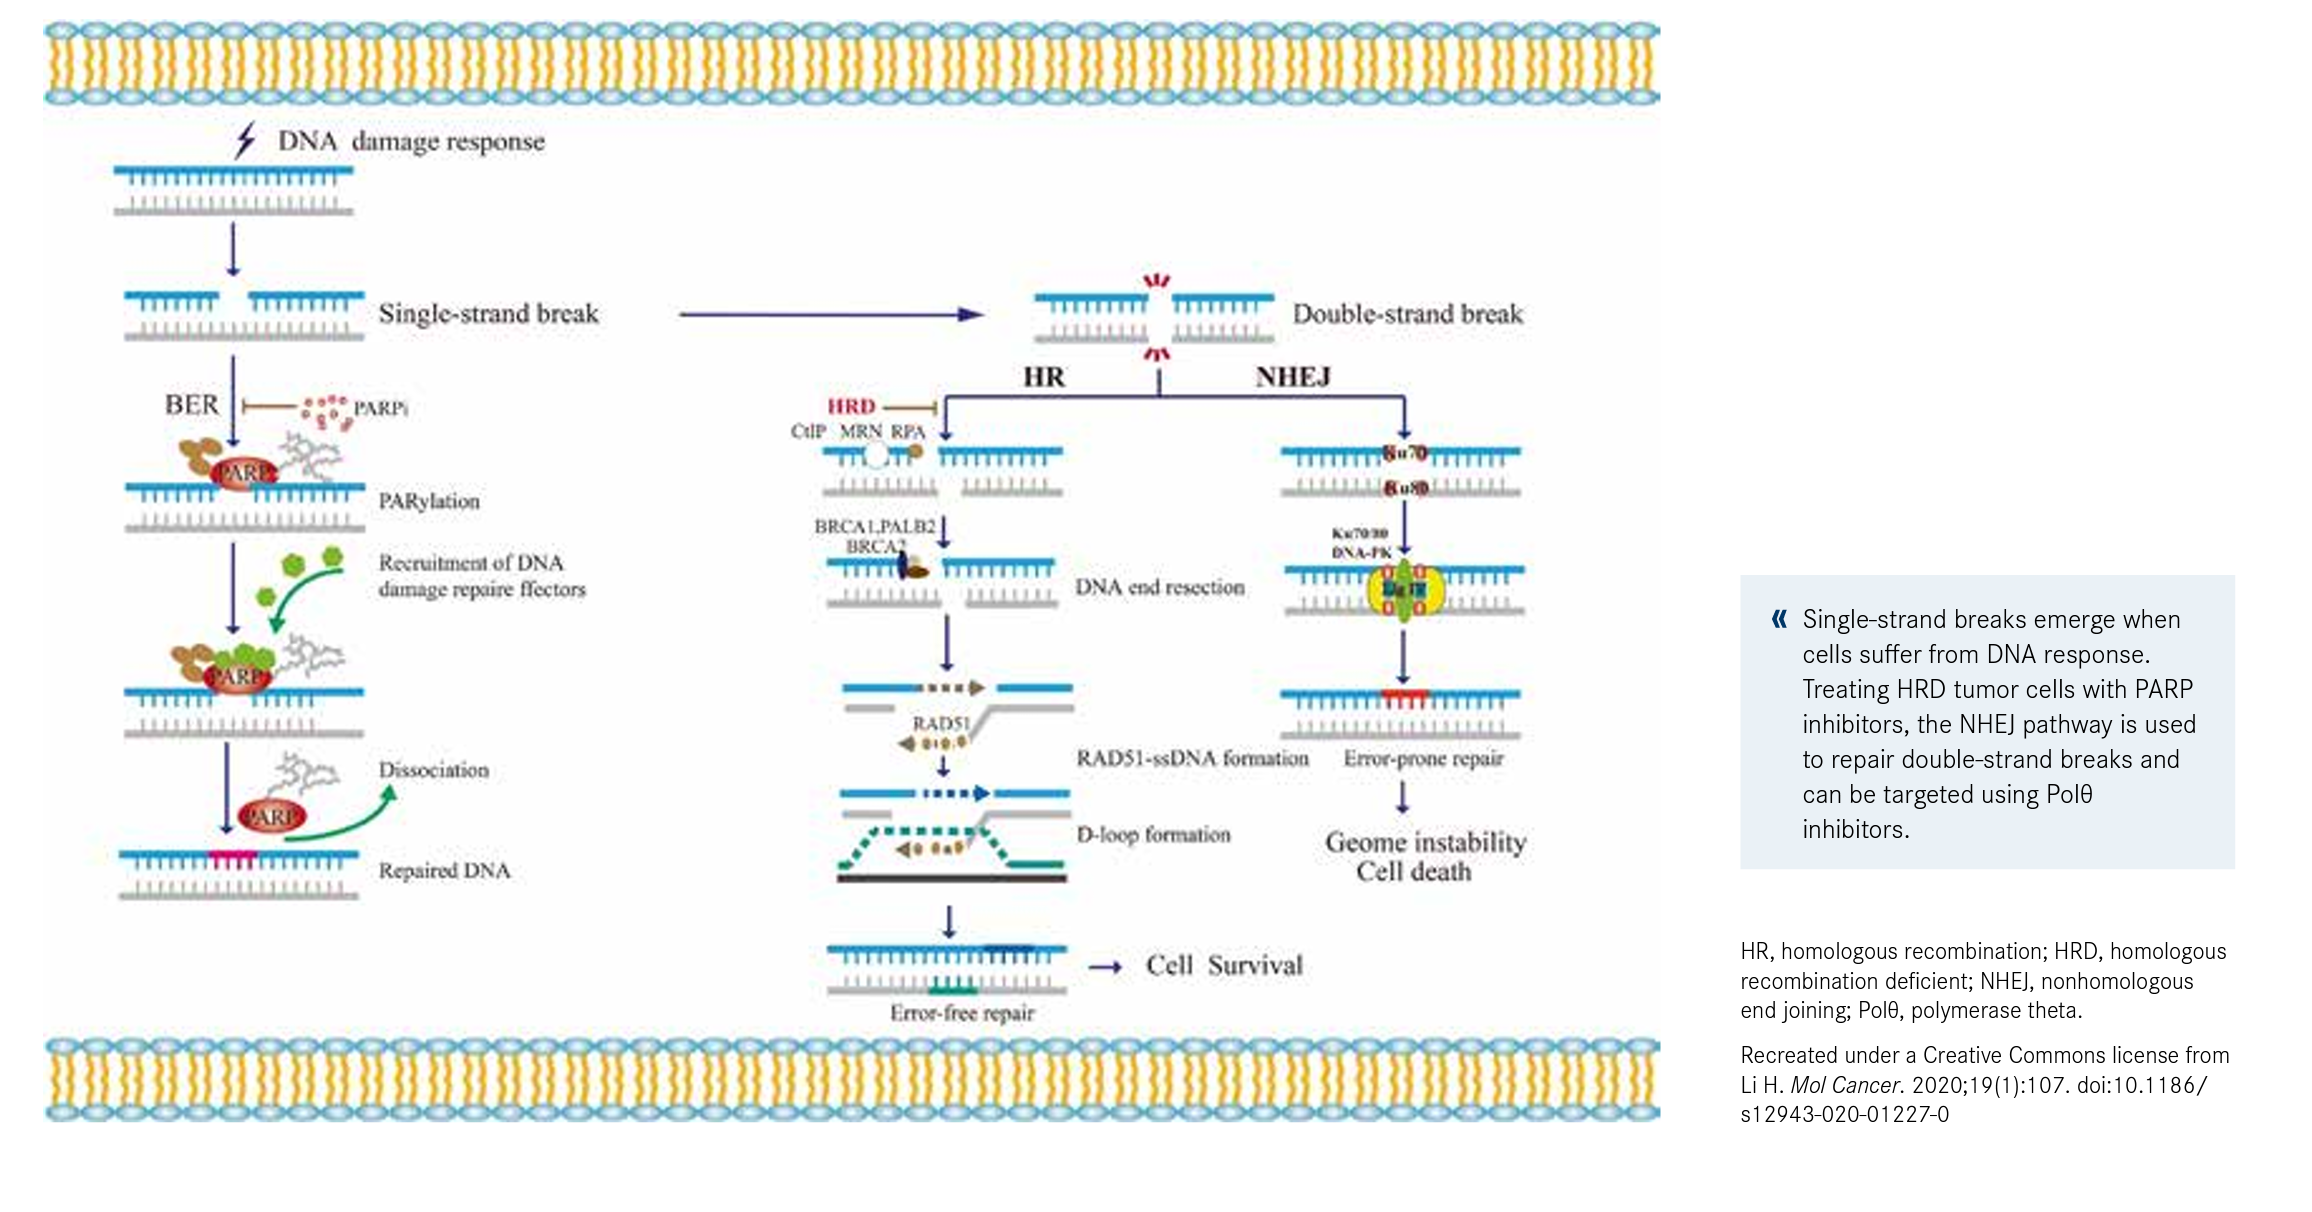 Figure. Pathways Implicated in PARP Inhibitor Resistance9